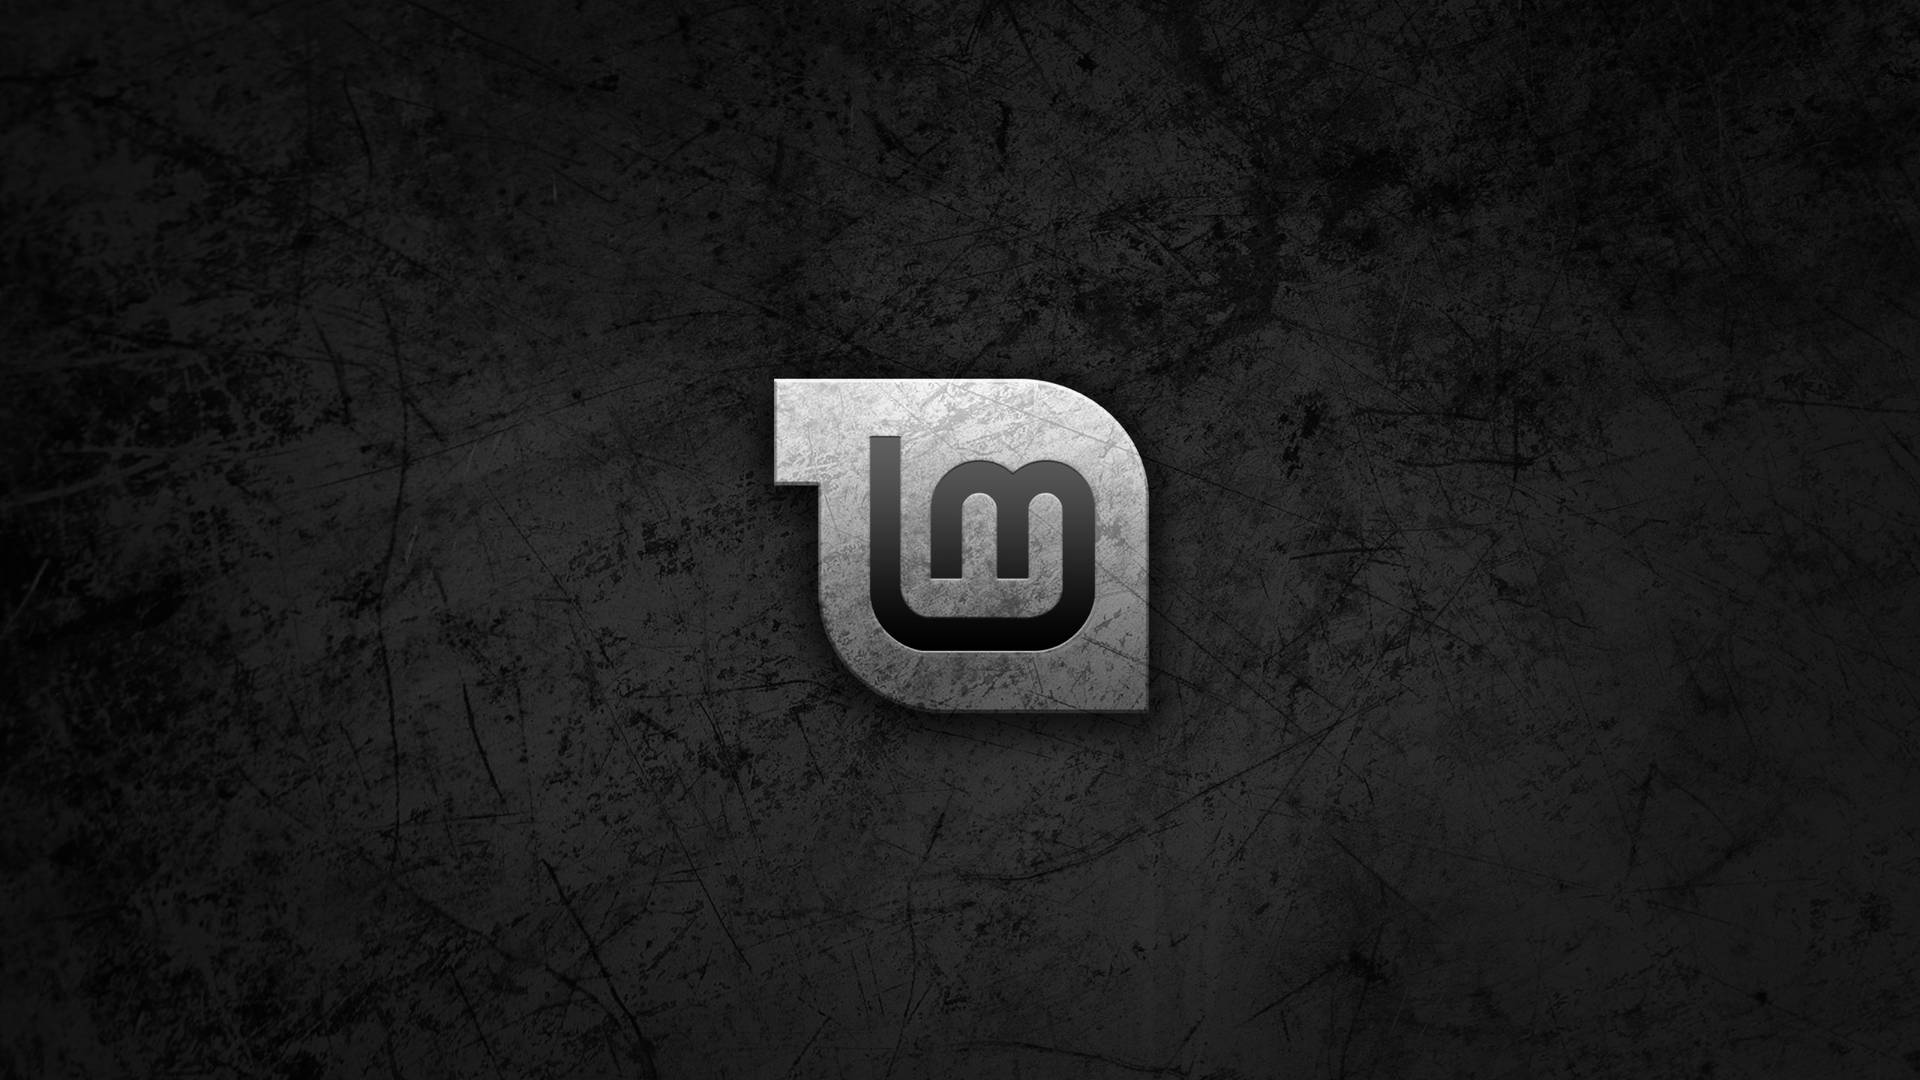 Gray Scratched Logo Of Linux Mint Operating System Background